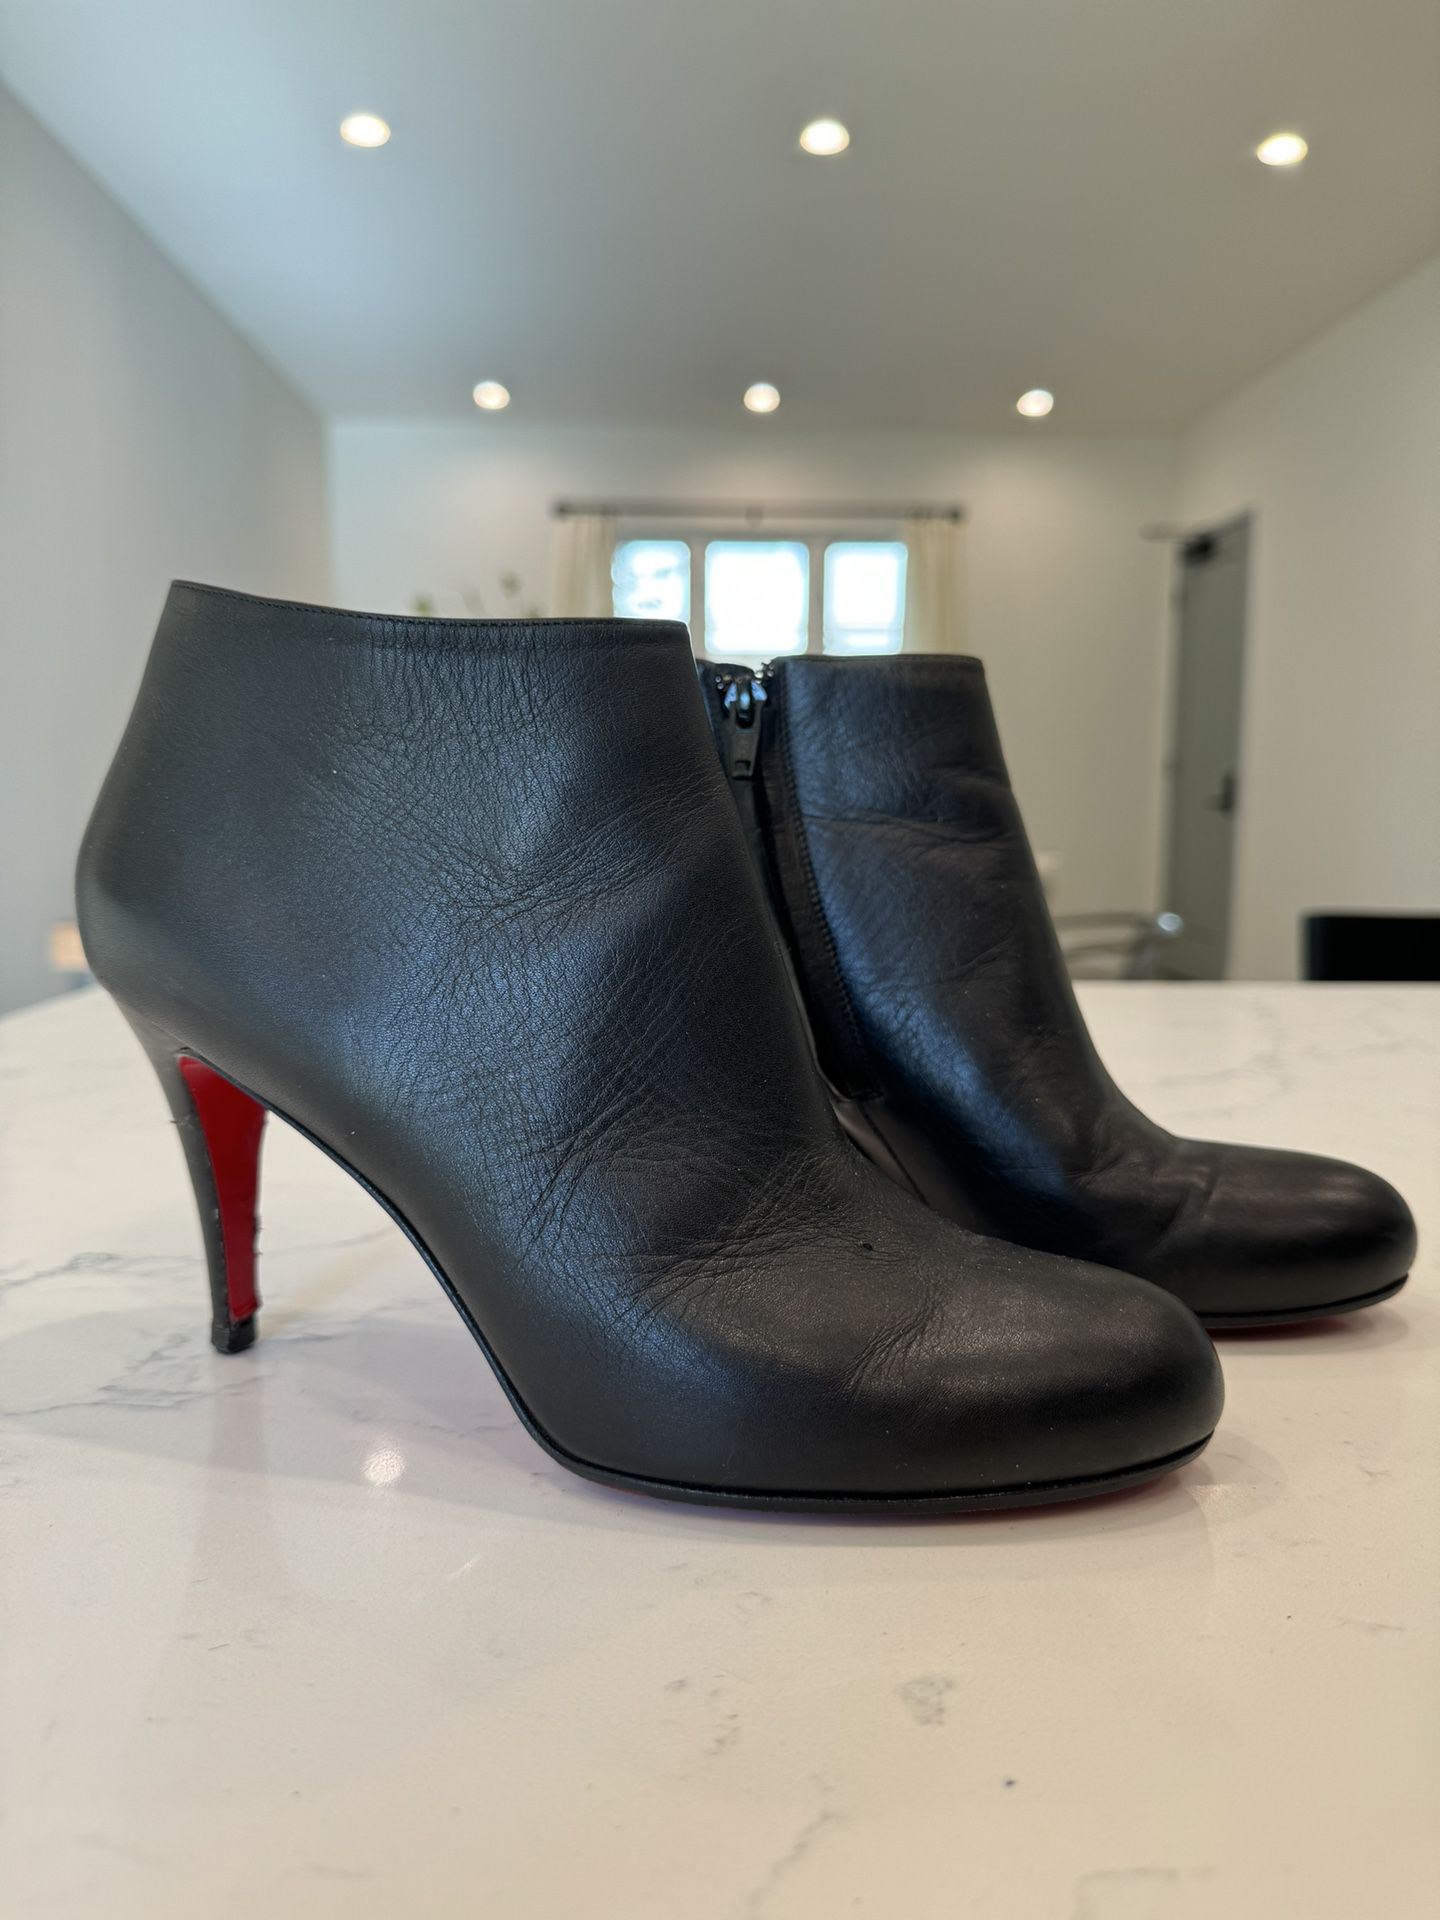 Christian Louboutin Belle Leather Red-Sole Ankle Boots. 